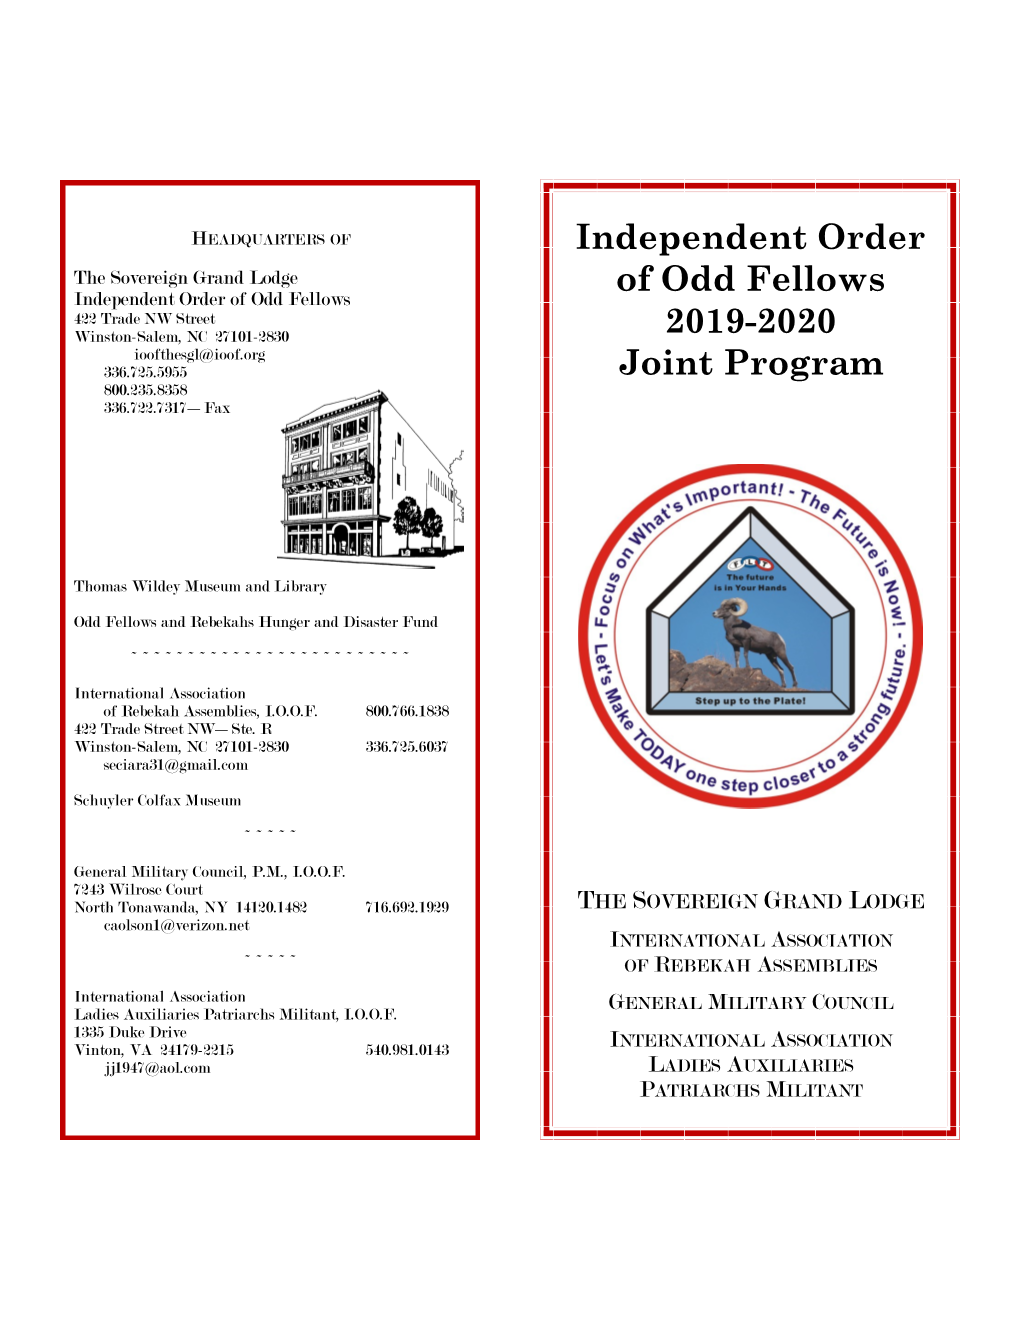 Independent Order of Odd Fellows 2019-2020 Joint Program